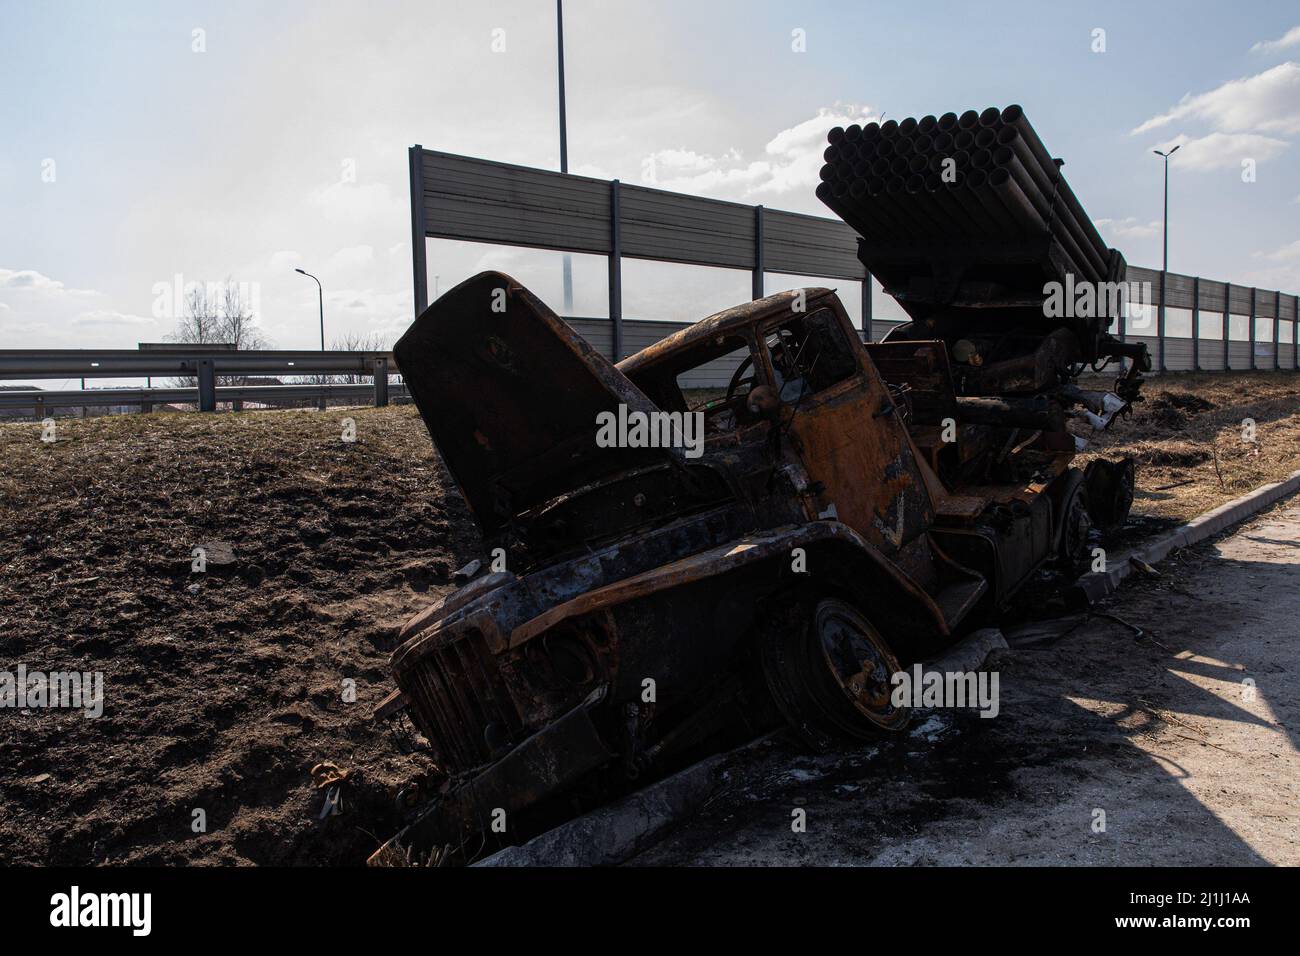 Kyiv, Ukraine. 25th Mar, 2022. A destroyed Russian MLRS(multiple launch rocket system) vehicle can be seen next to the highway in Kyiv Oblast. Day 29 of the Russia-Ukraine war, as Ukraine continues the defence of its capital Kyiv from Russia attack. Ukraine Ministry Defense claimed they have destroyed 561 Russian tanks, as NATO says Russia may have lost 15,000 troops in just a month of the war. (Photo by Alex Chan Tsz Yuk/SOPA Images/Sipa USA) Credit: Sipa USA/Alamy Live News Stock Photo